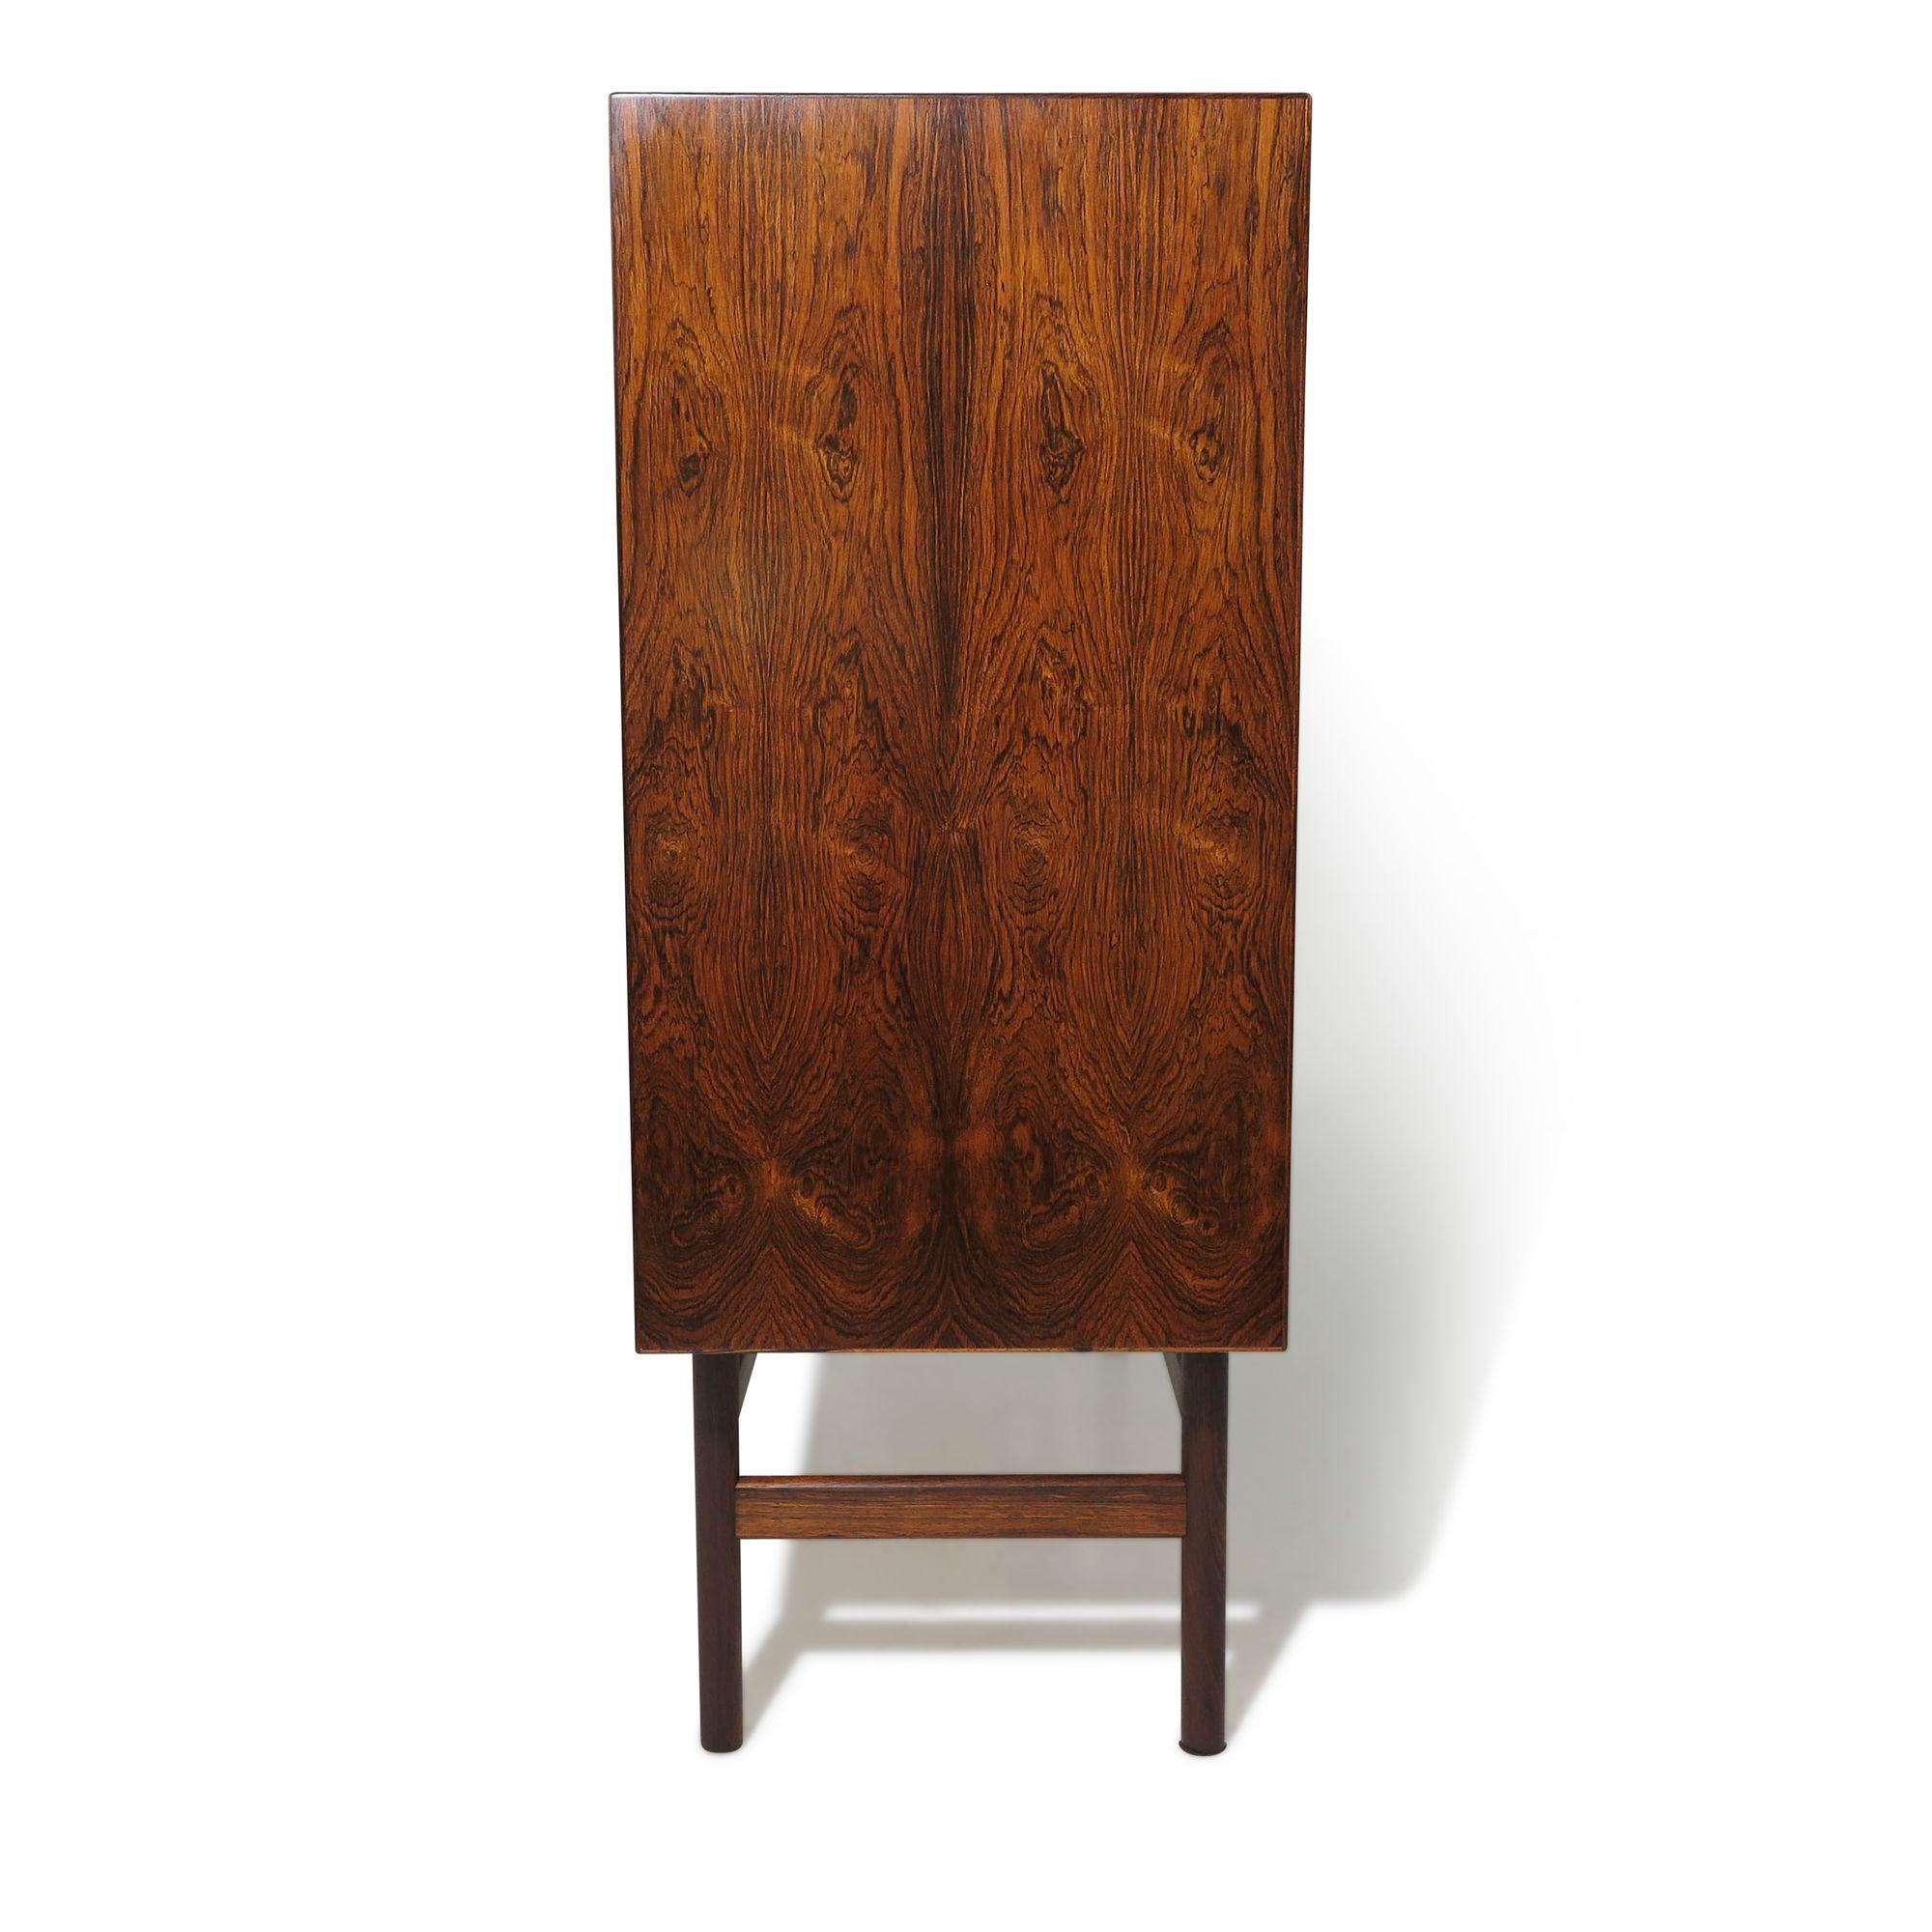 20th Century Stunning Rosewood Cabinet with Book-matched Grain For Sale